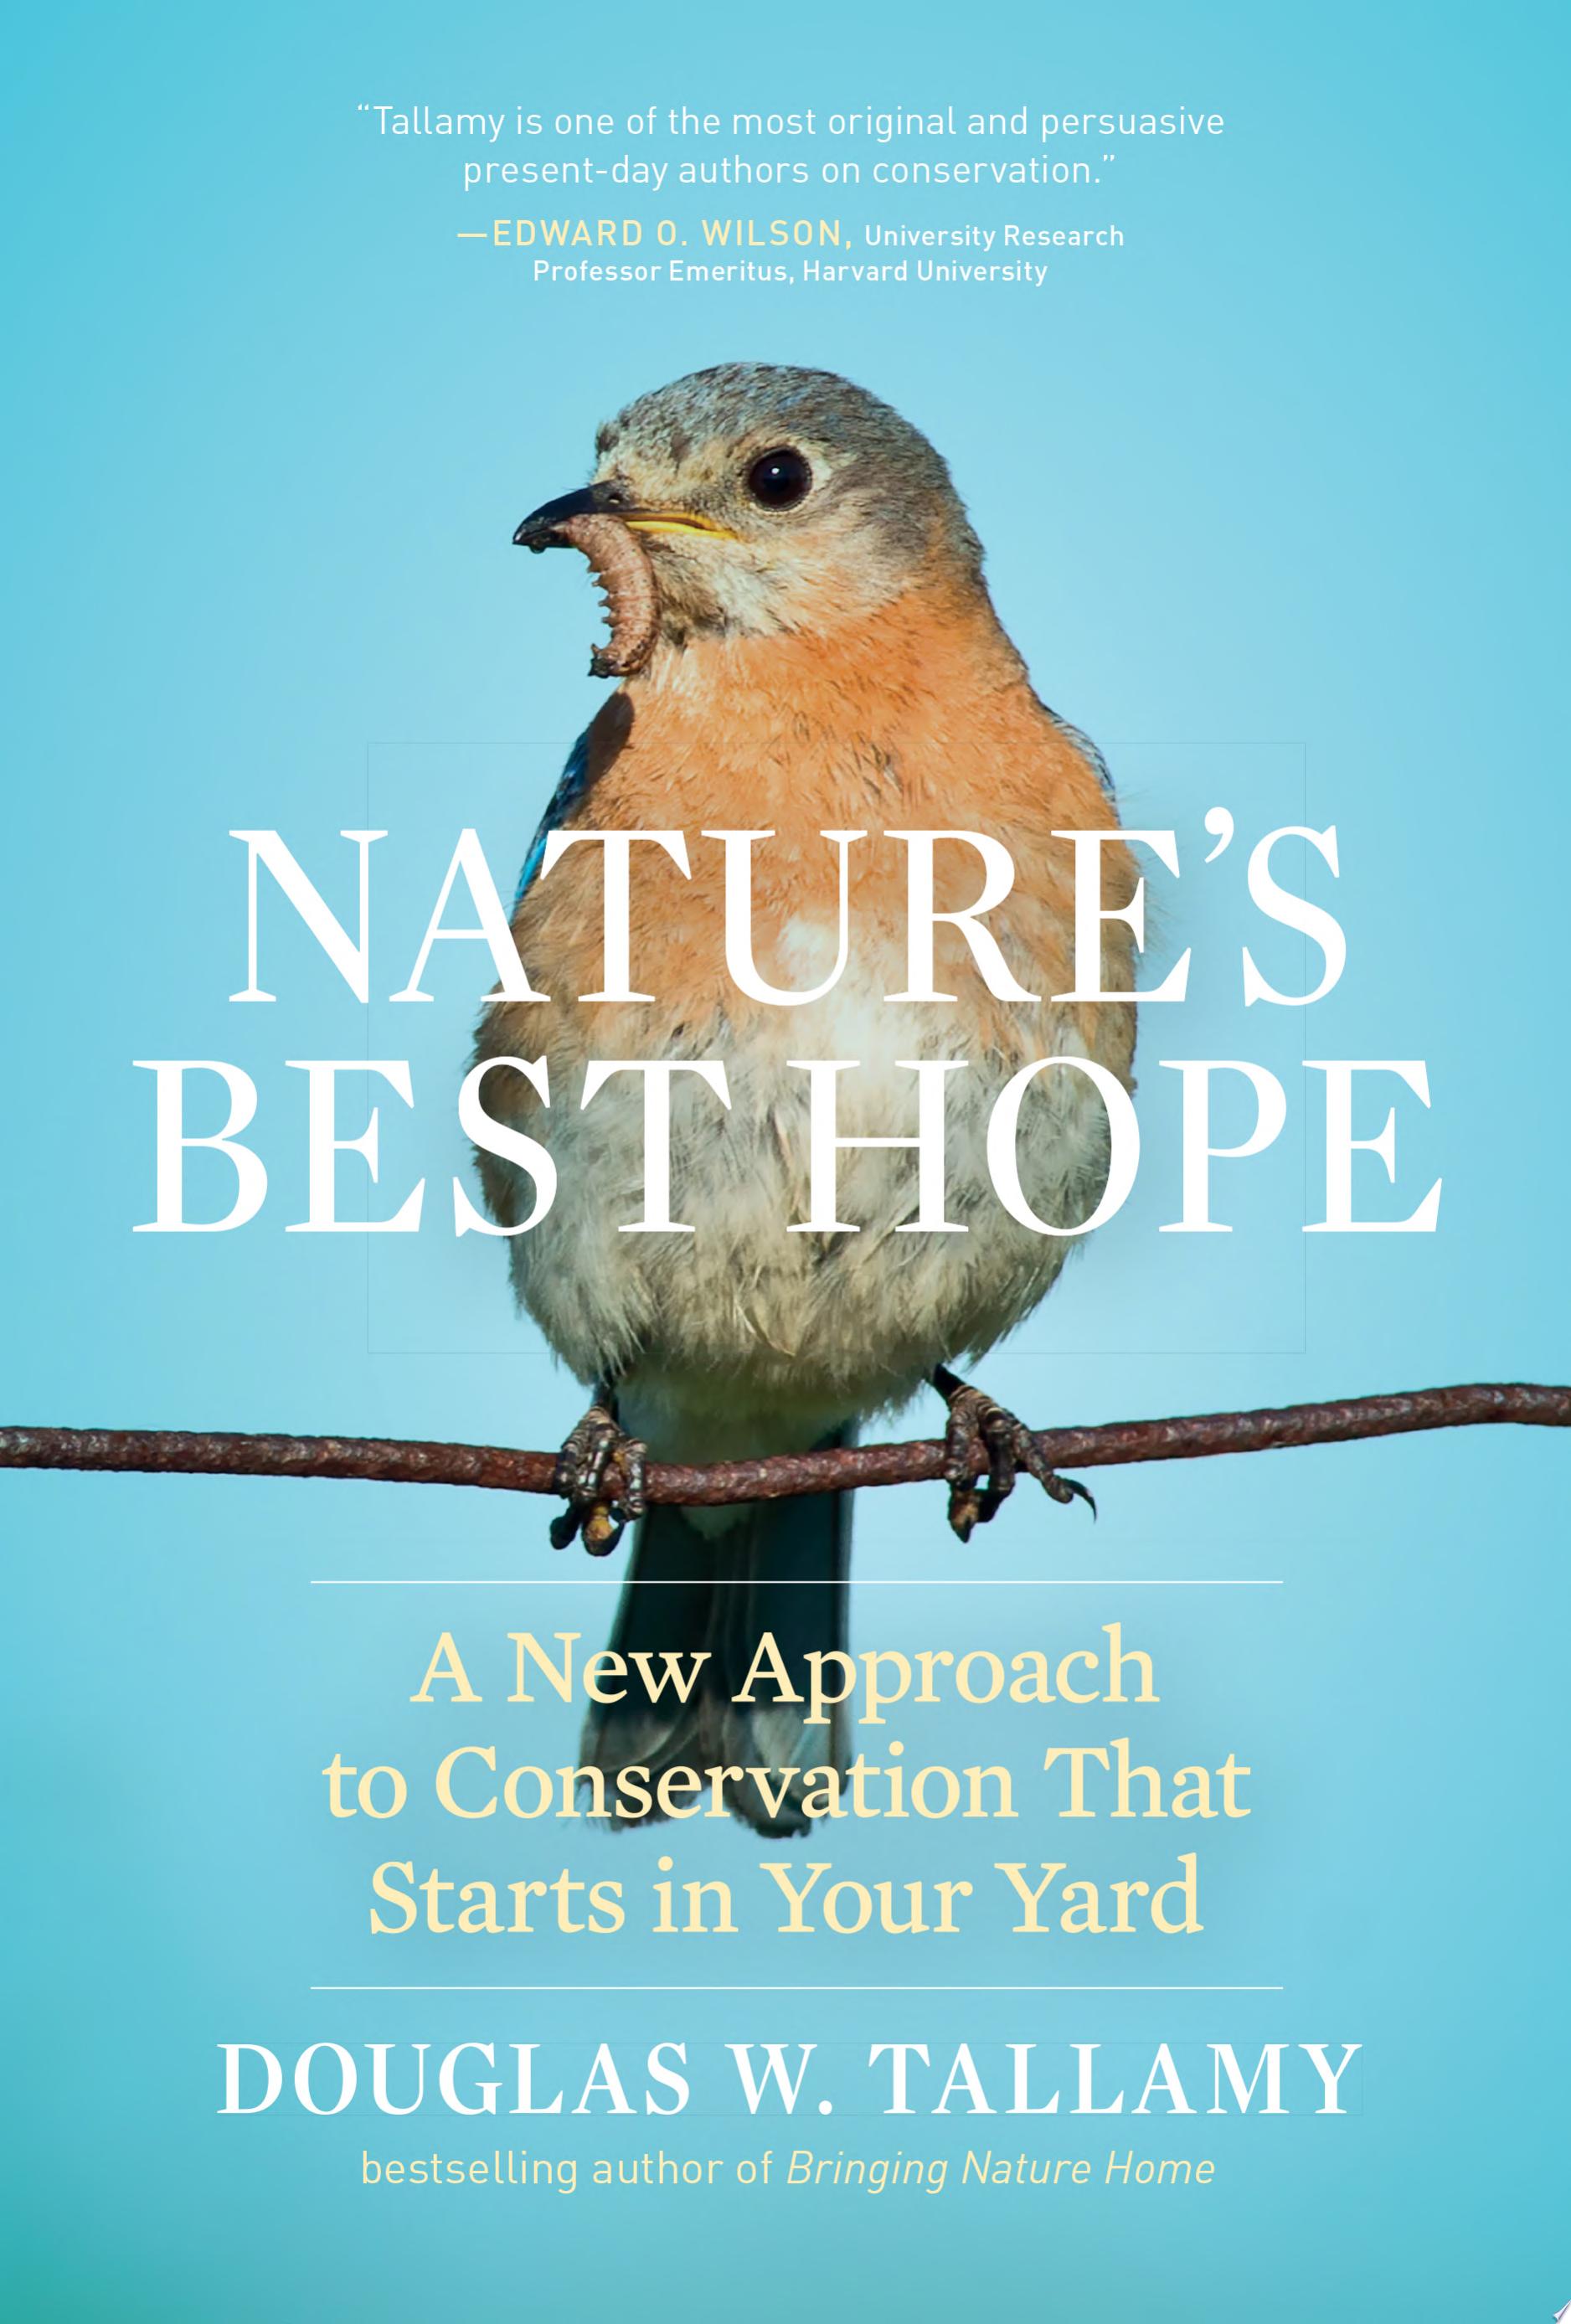 Image for "Nature's Best Hope: a new approach to conservation that starts in your yard"